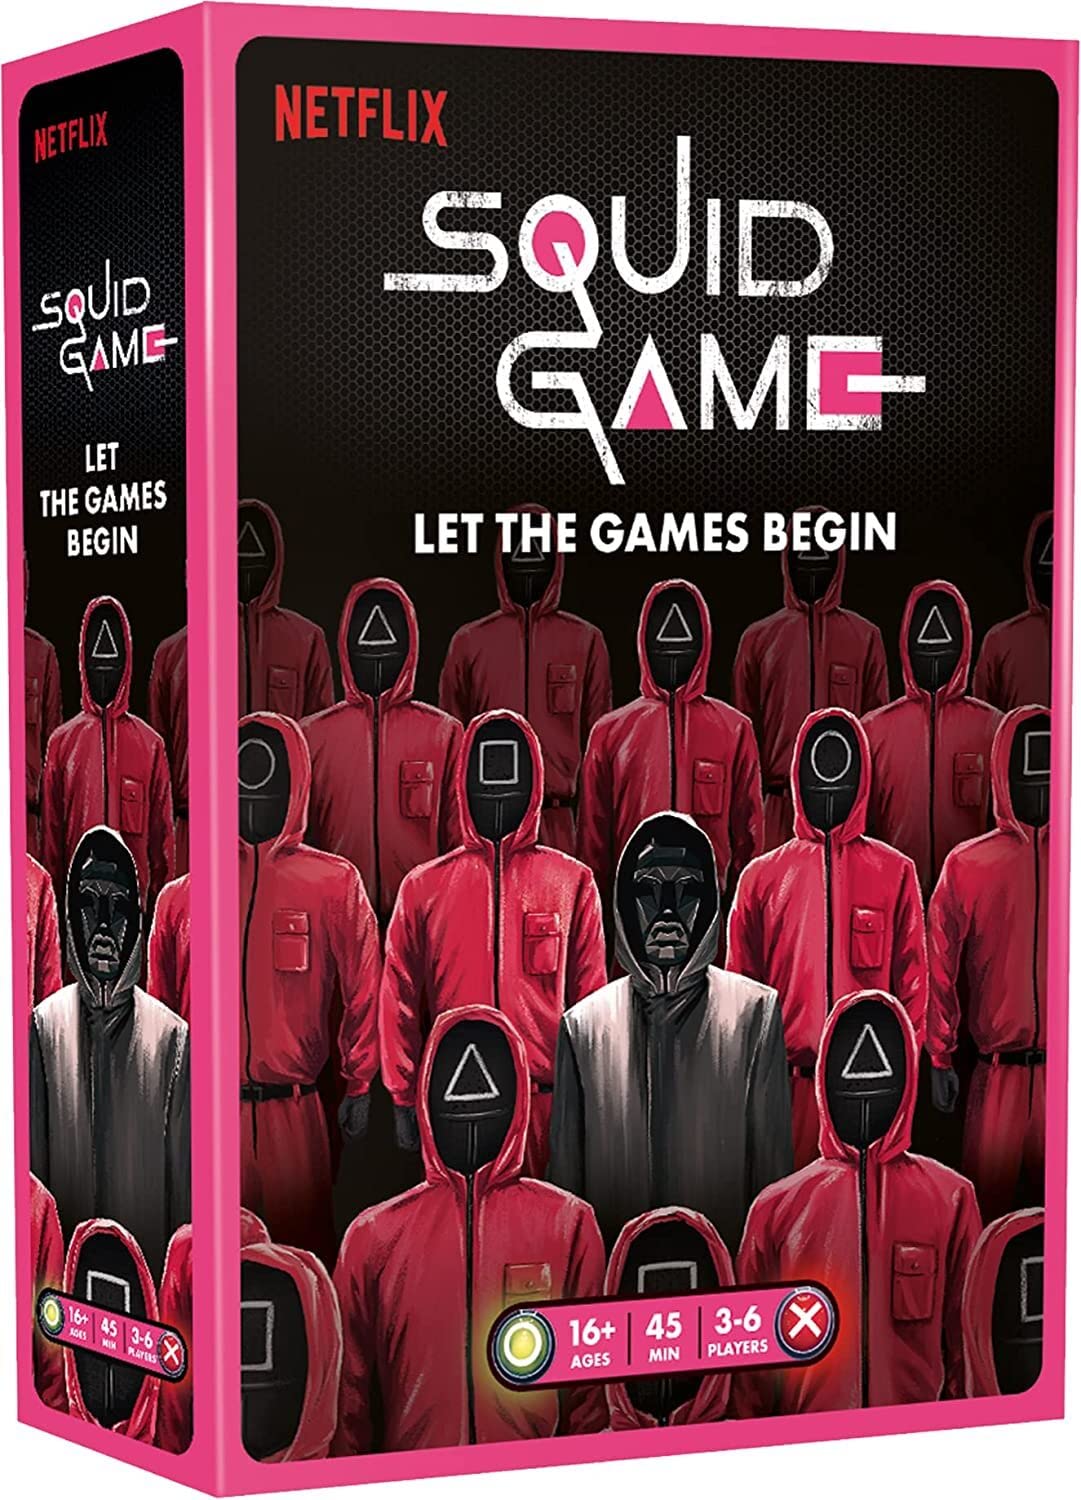 Squid Game The Board Game | Thrilling Survival Strategy Game for Adults and Teens Based on The Hit Netlix Series | Ages 16+ | 3-6 Players | Average Playtime 45 Minutes | Made by Mixlore